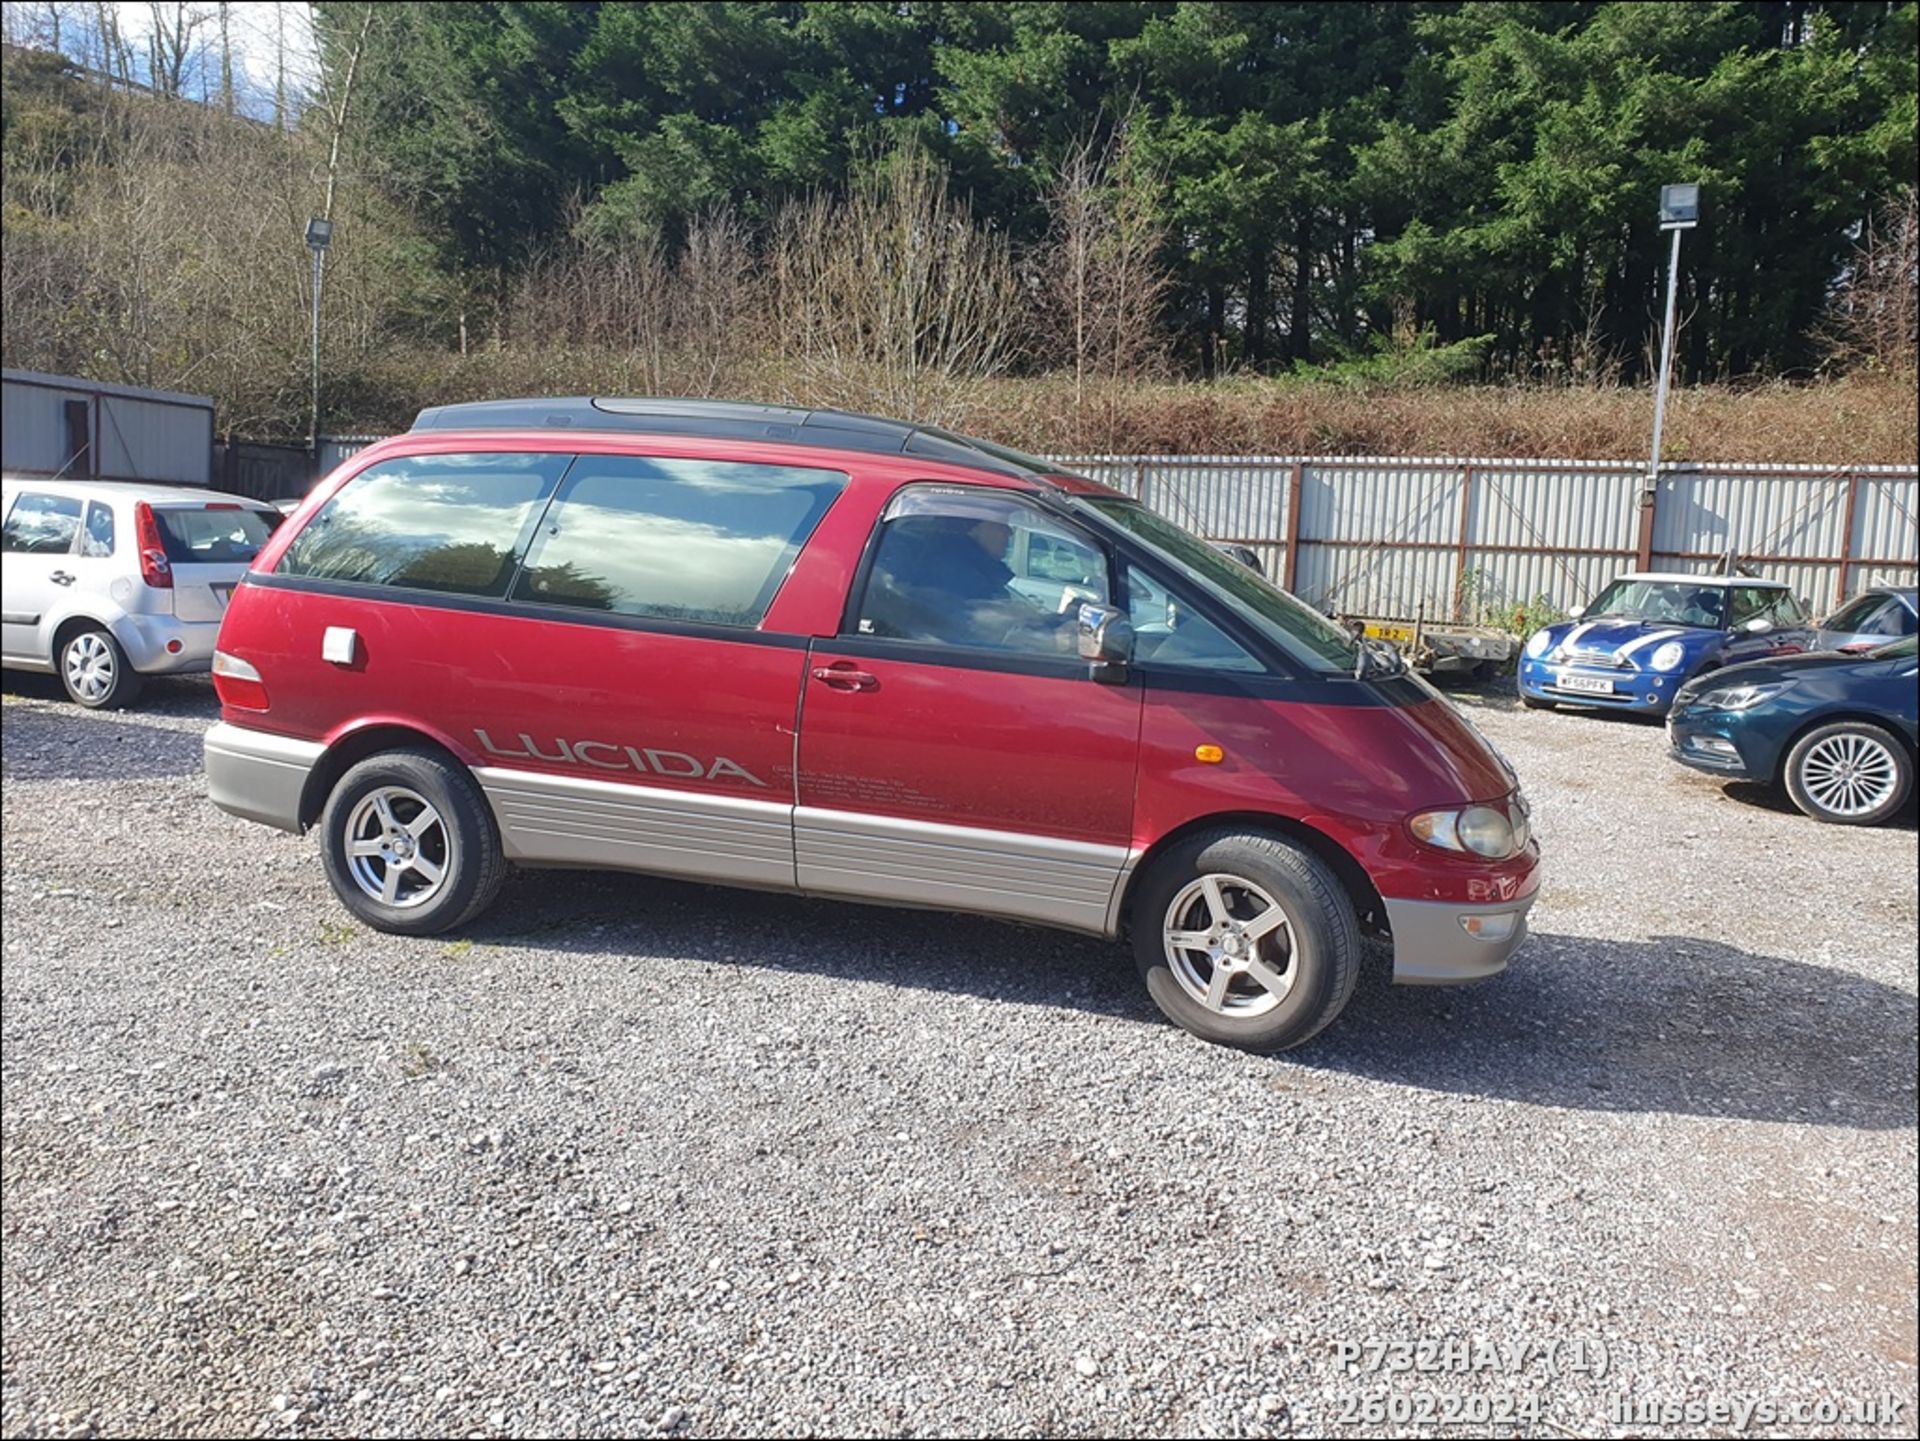 1997 TOYOTA LUCIDA - 2184cc 4dr Van (Red) - Image 2 of 22